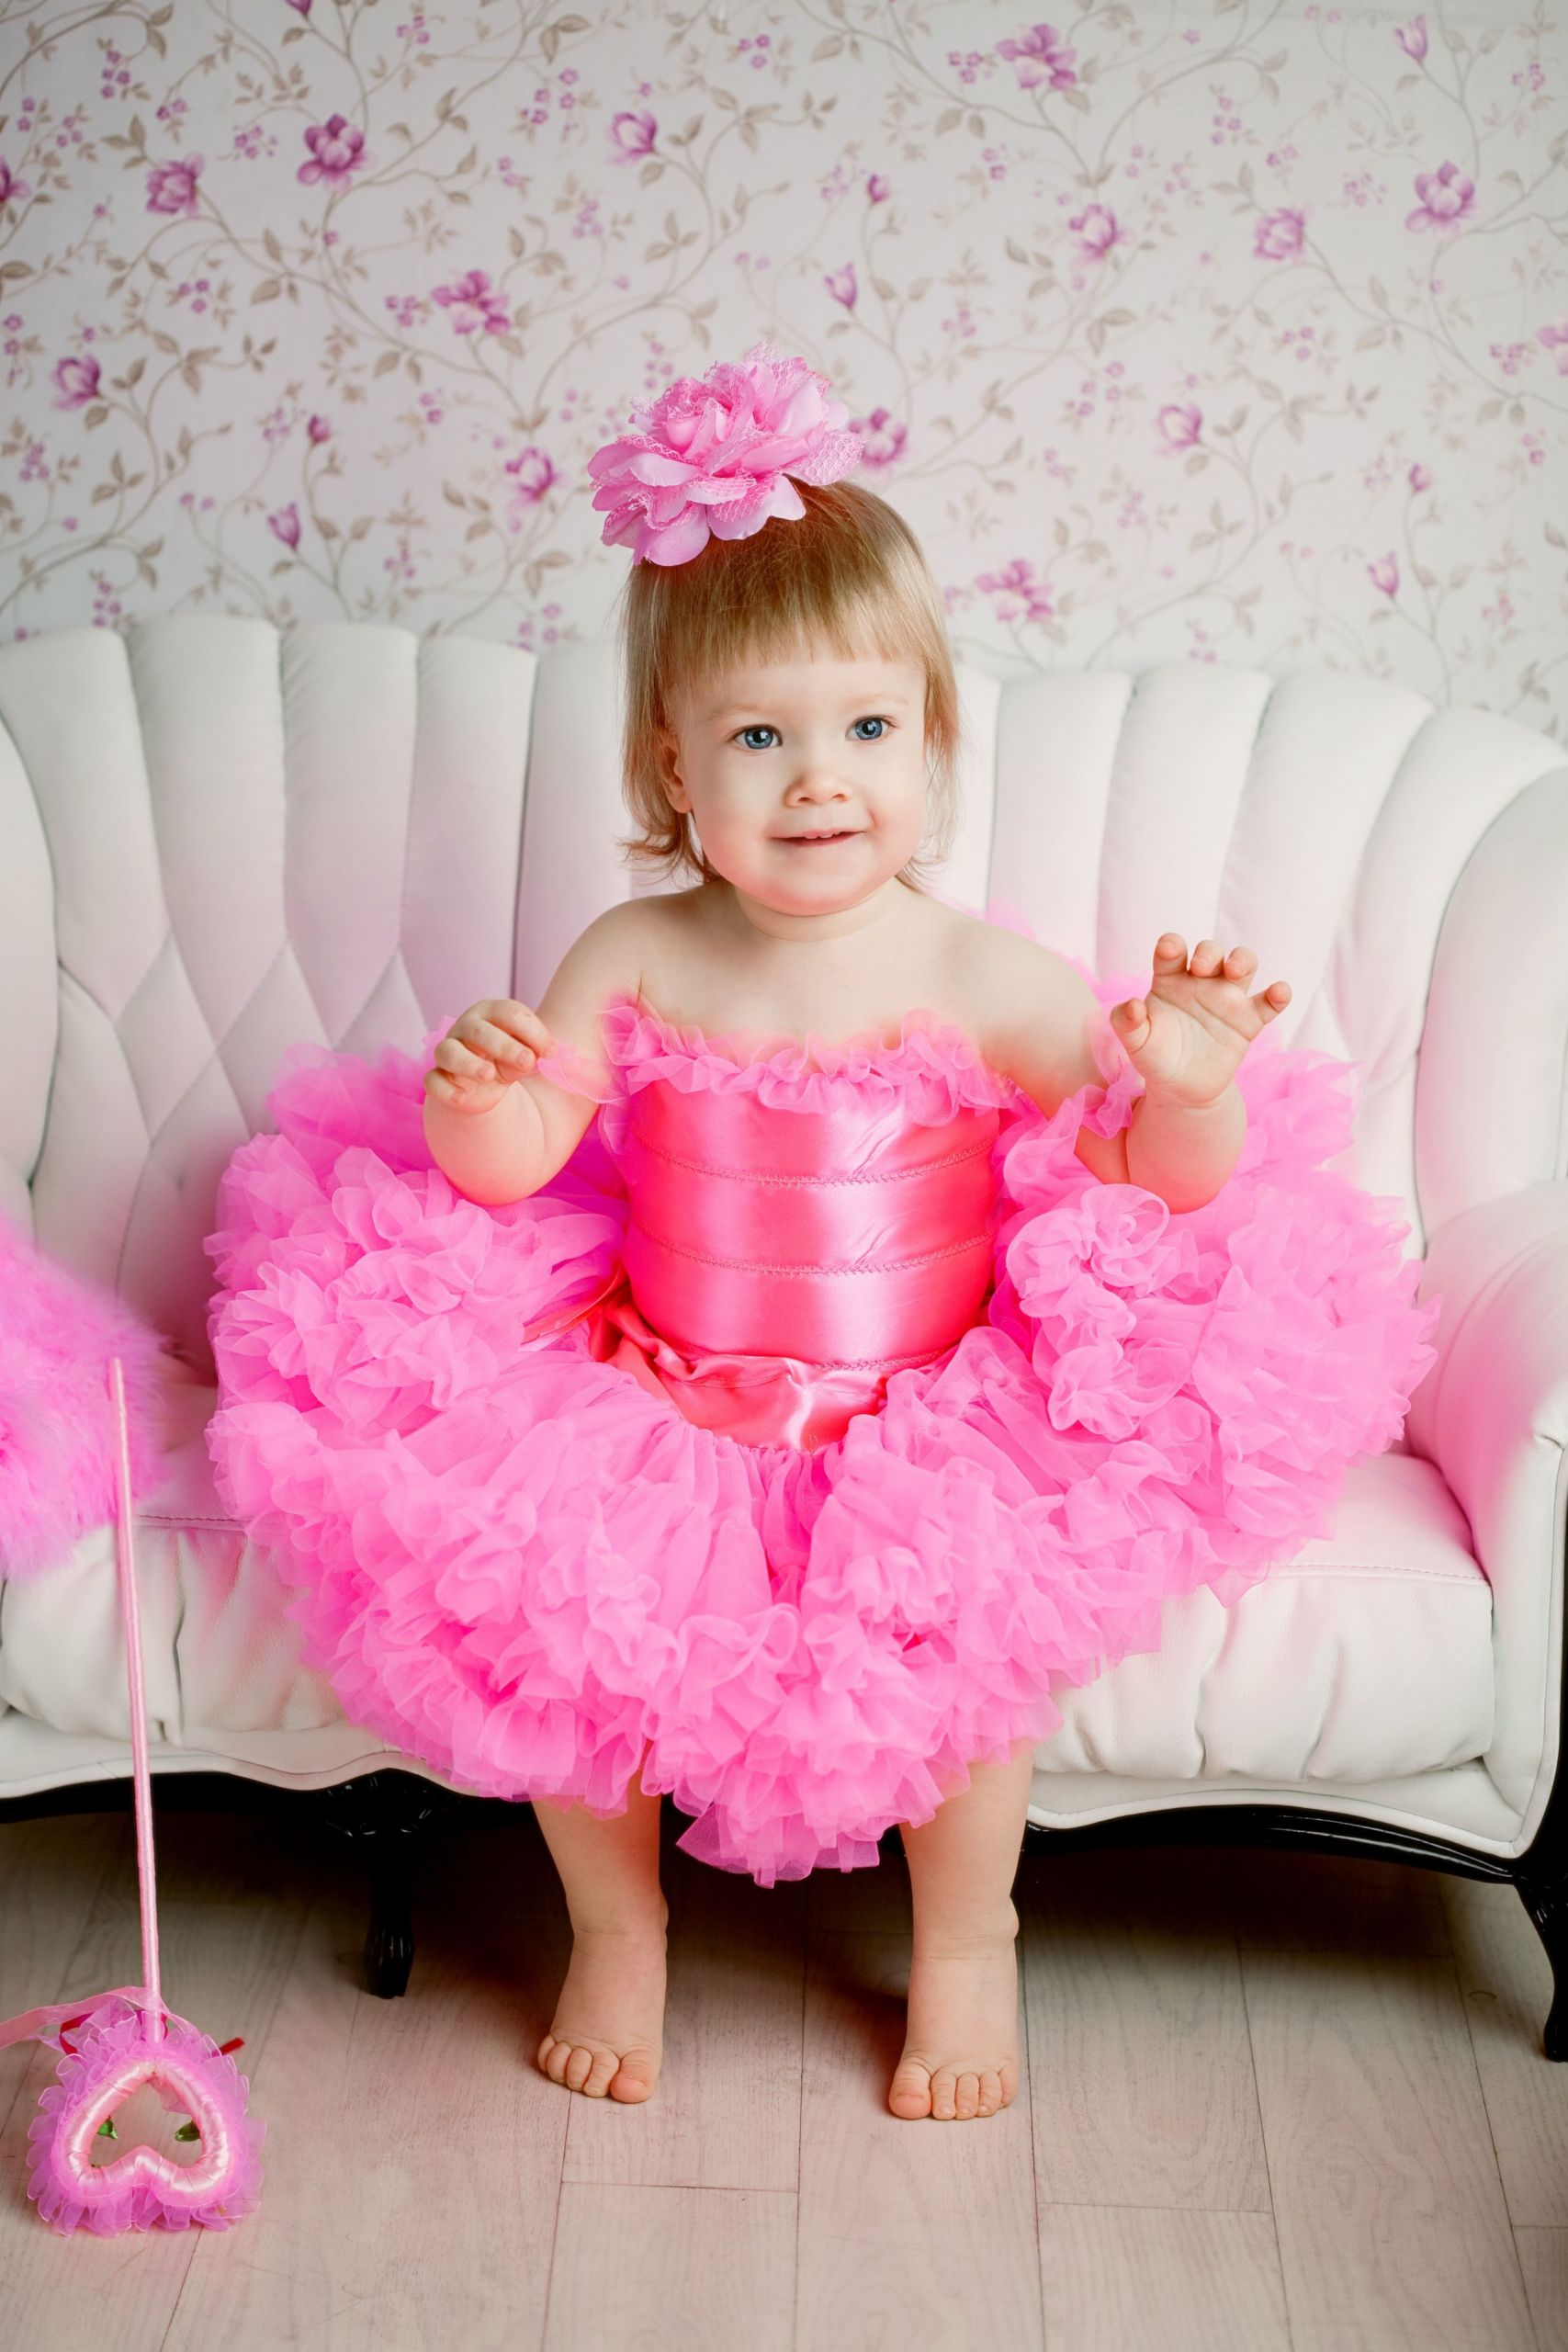 Party Wear For Baby Girls
 Best Baby Girl Party Dresses Ideas 2018 Kid versity